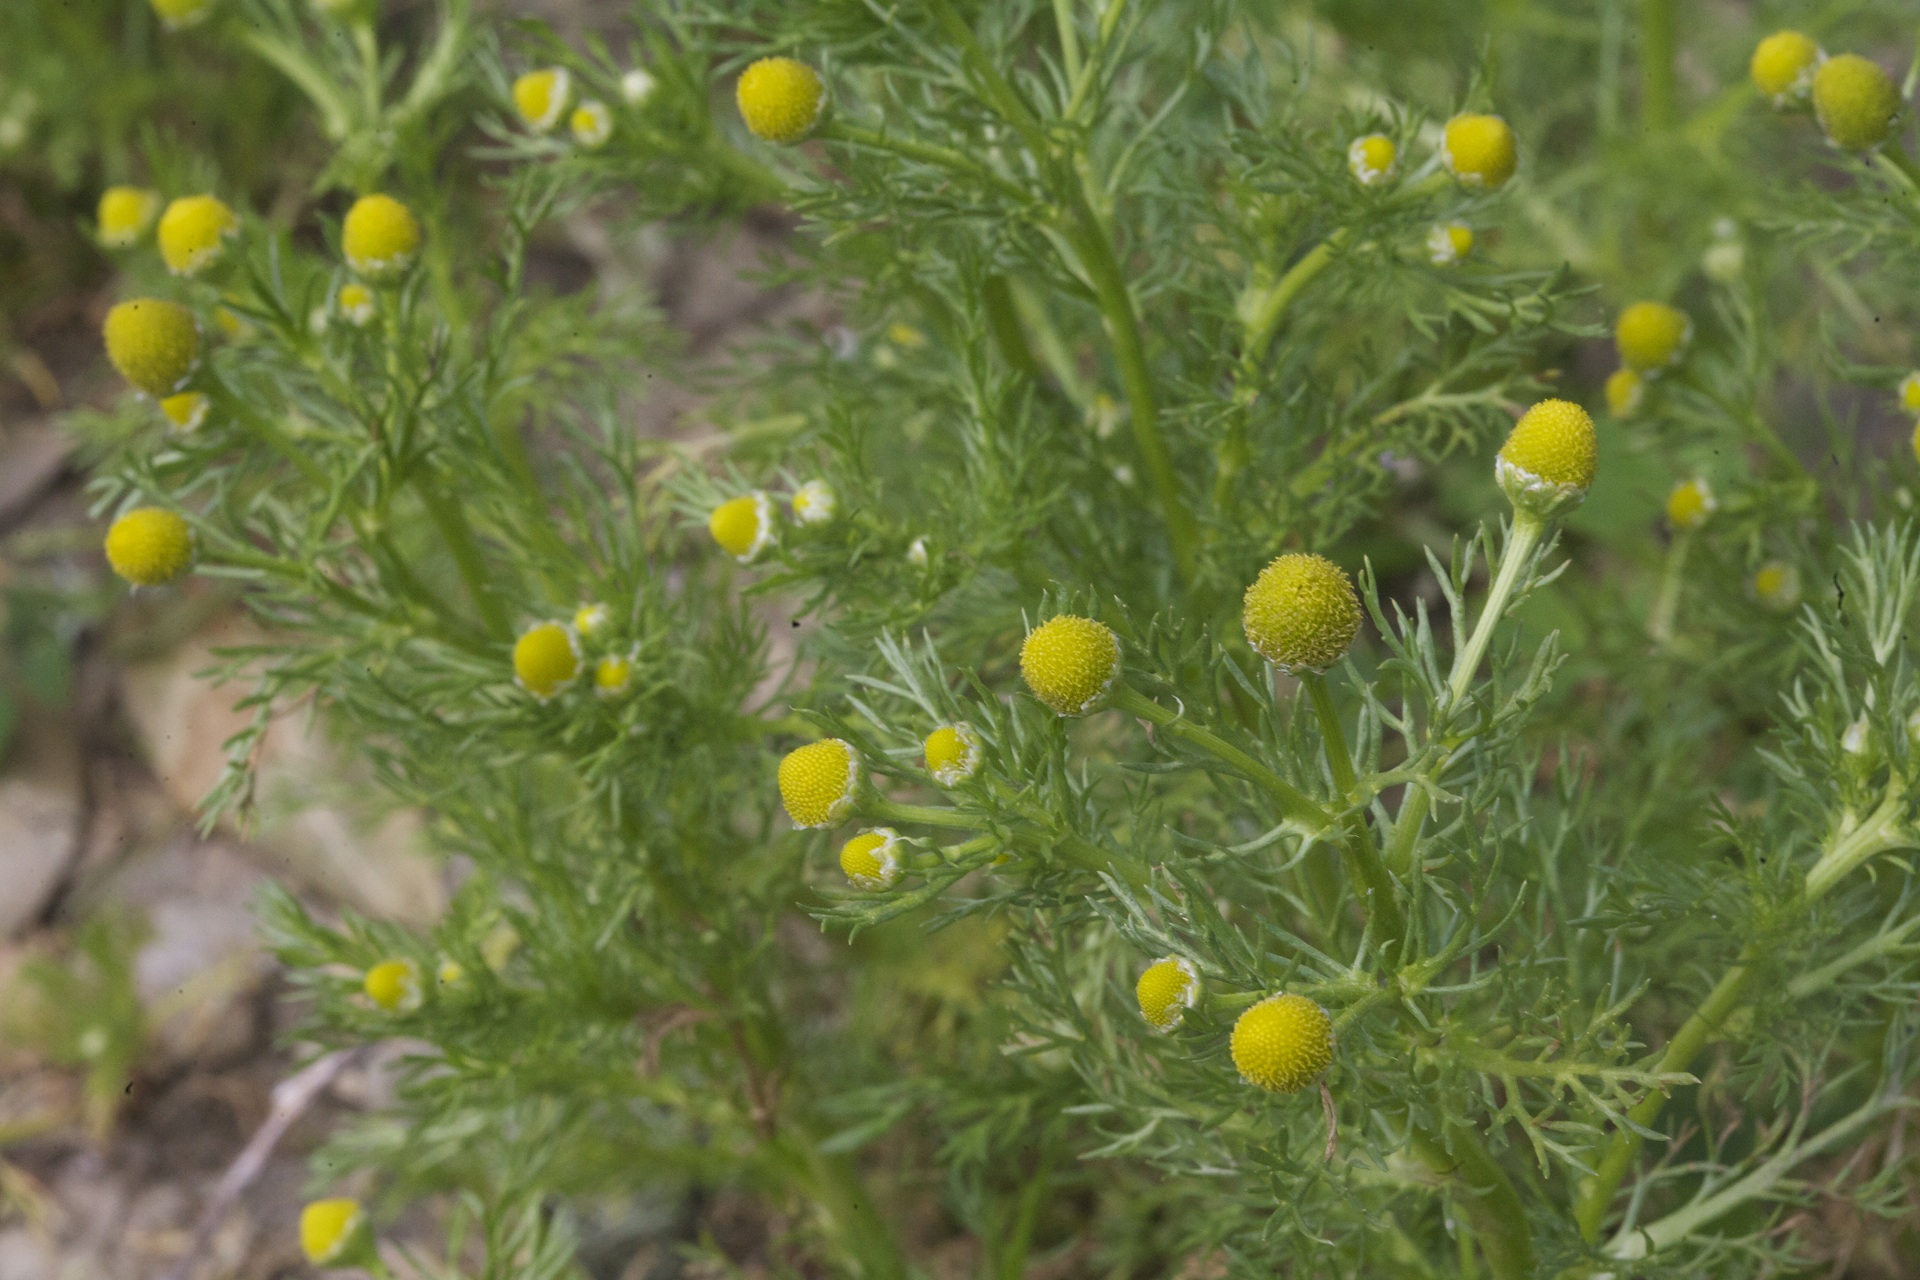 Plant Pineapple weed to keep mosquitoes away